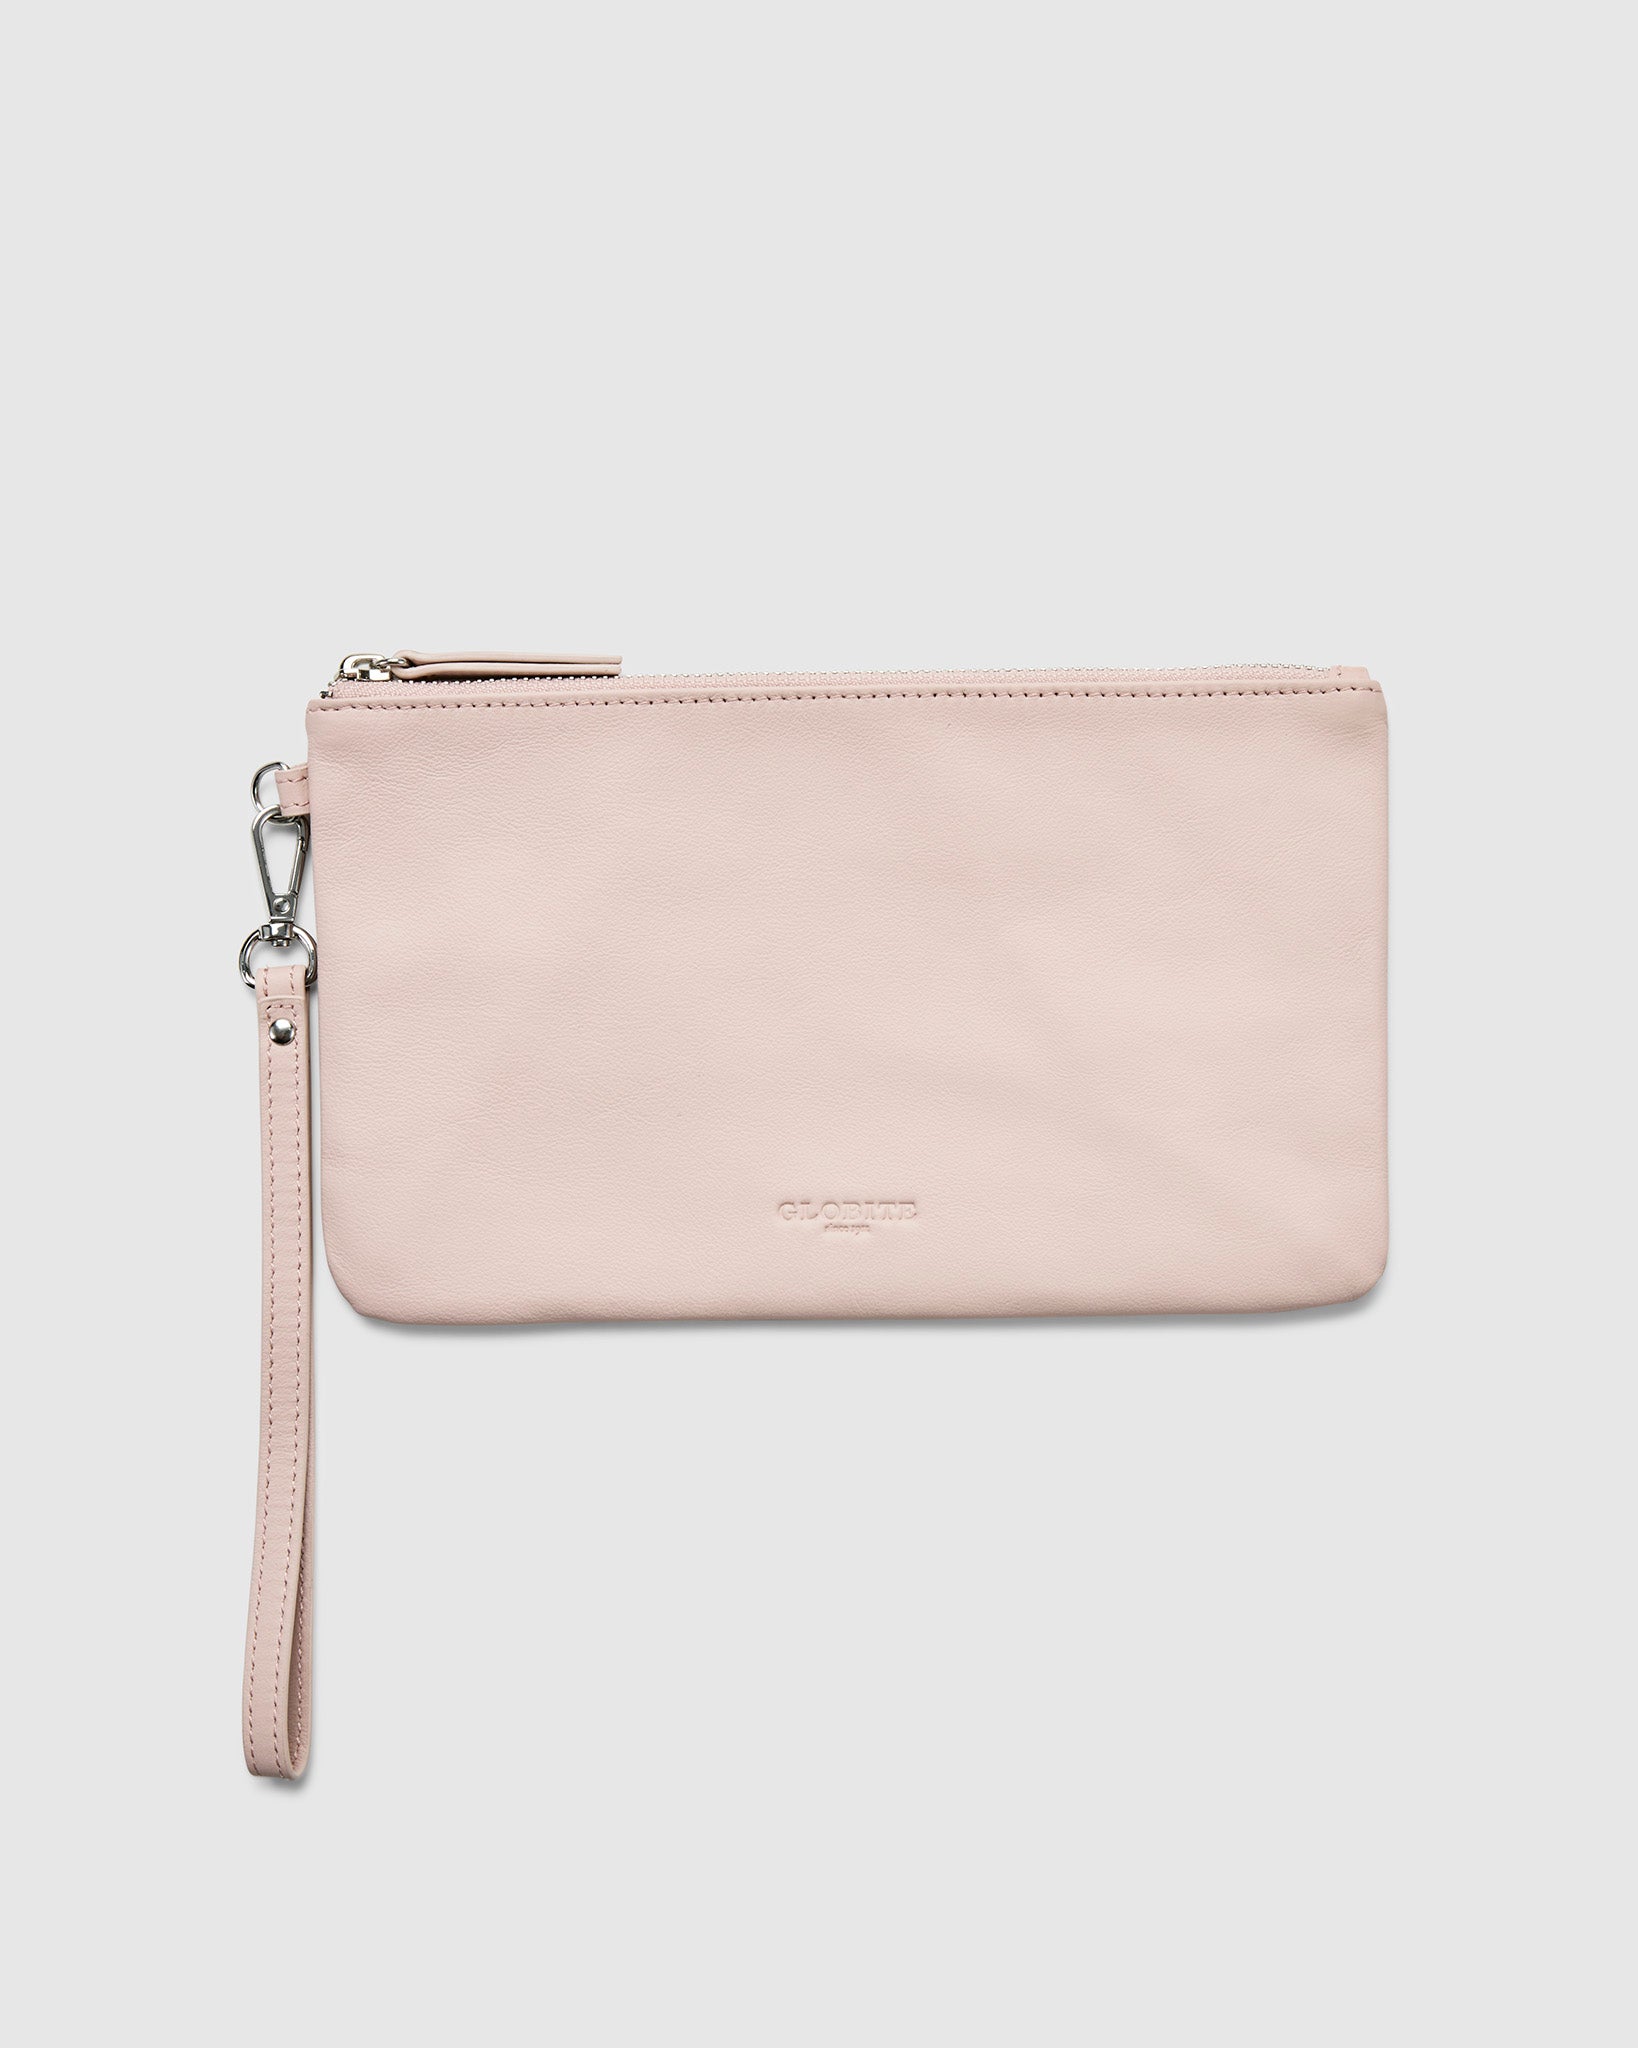 Leather Clutch in Chic Rose